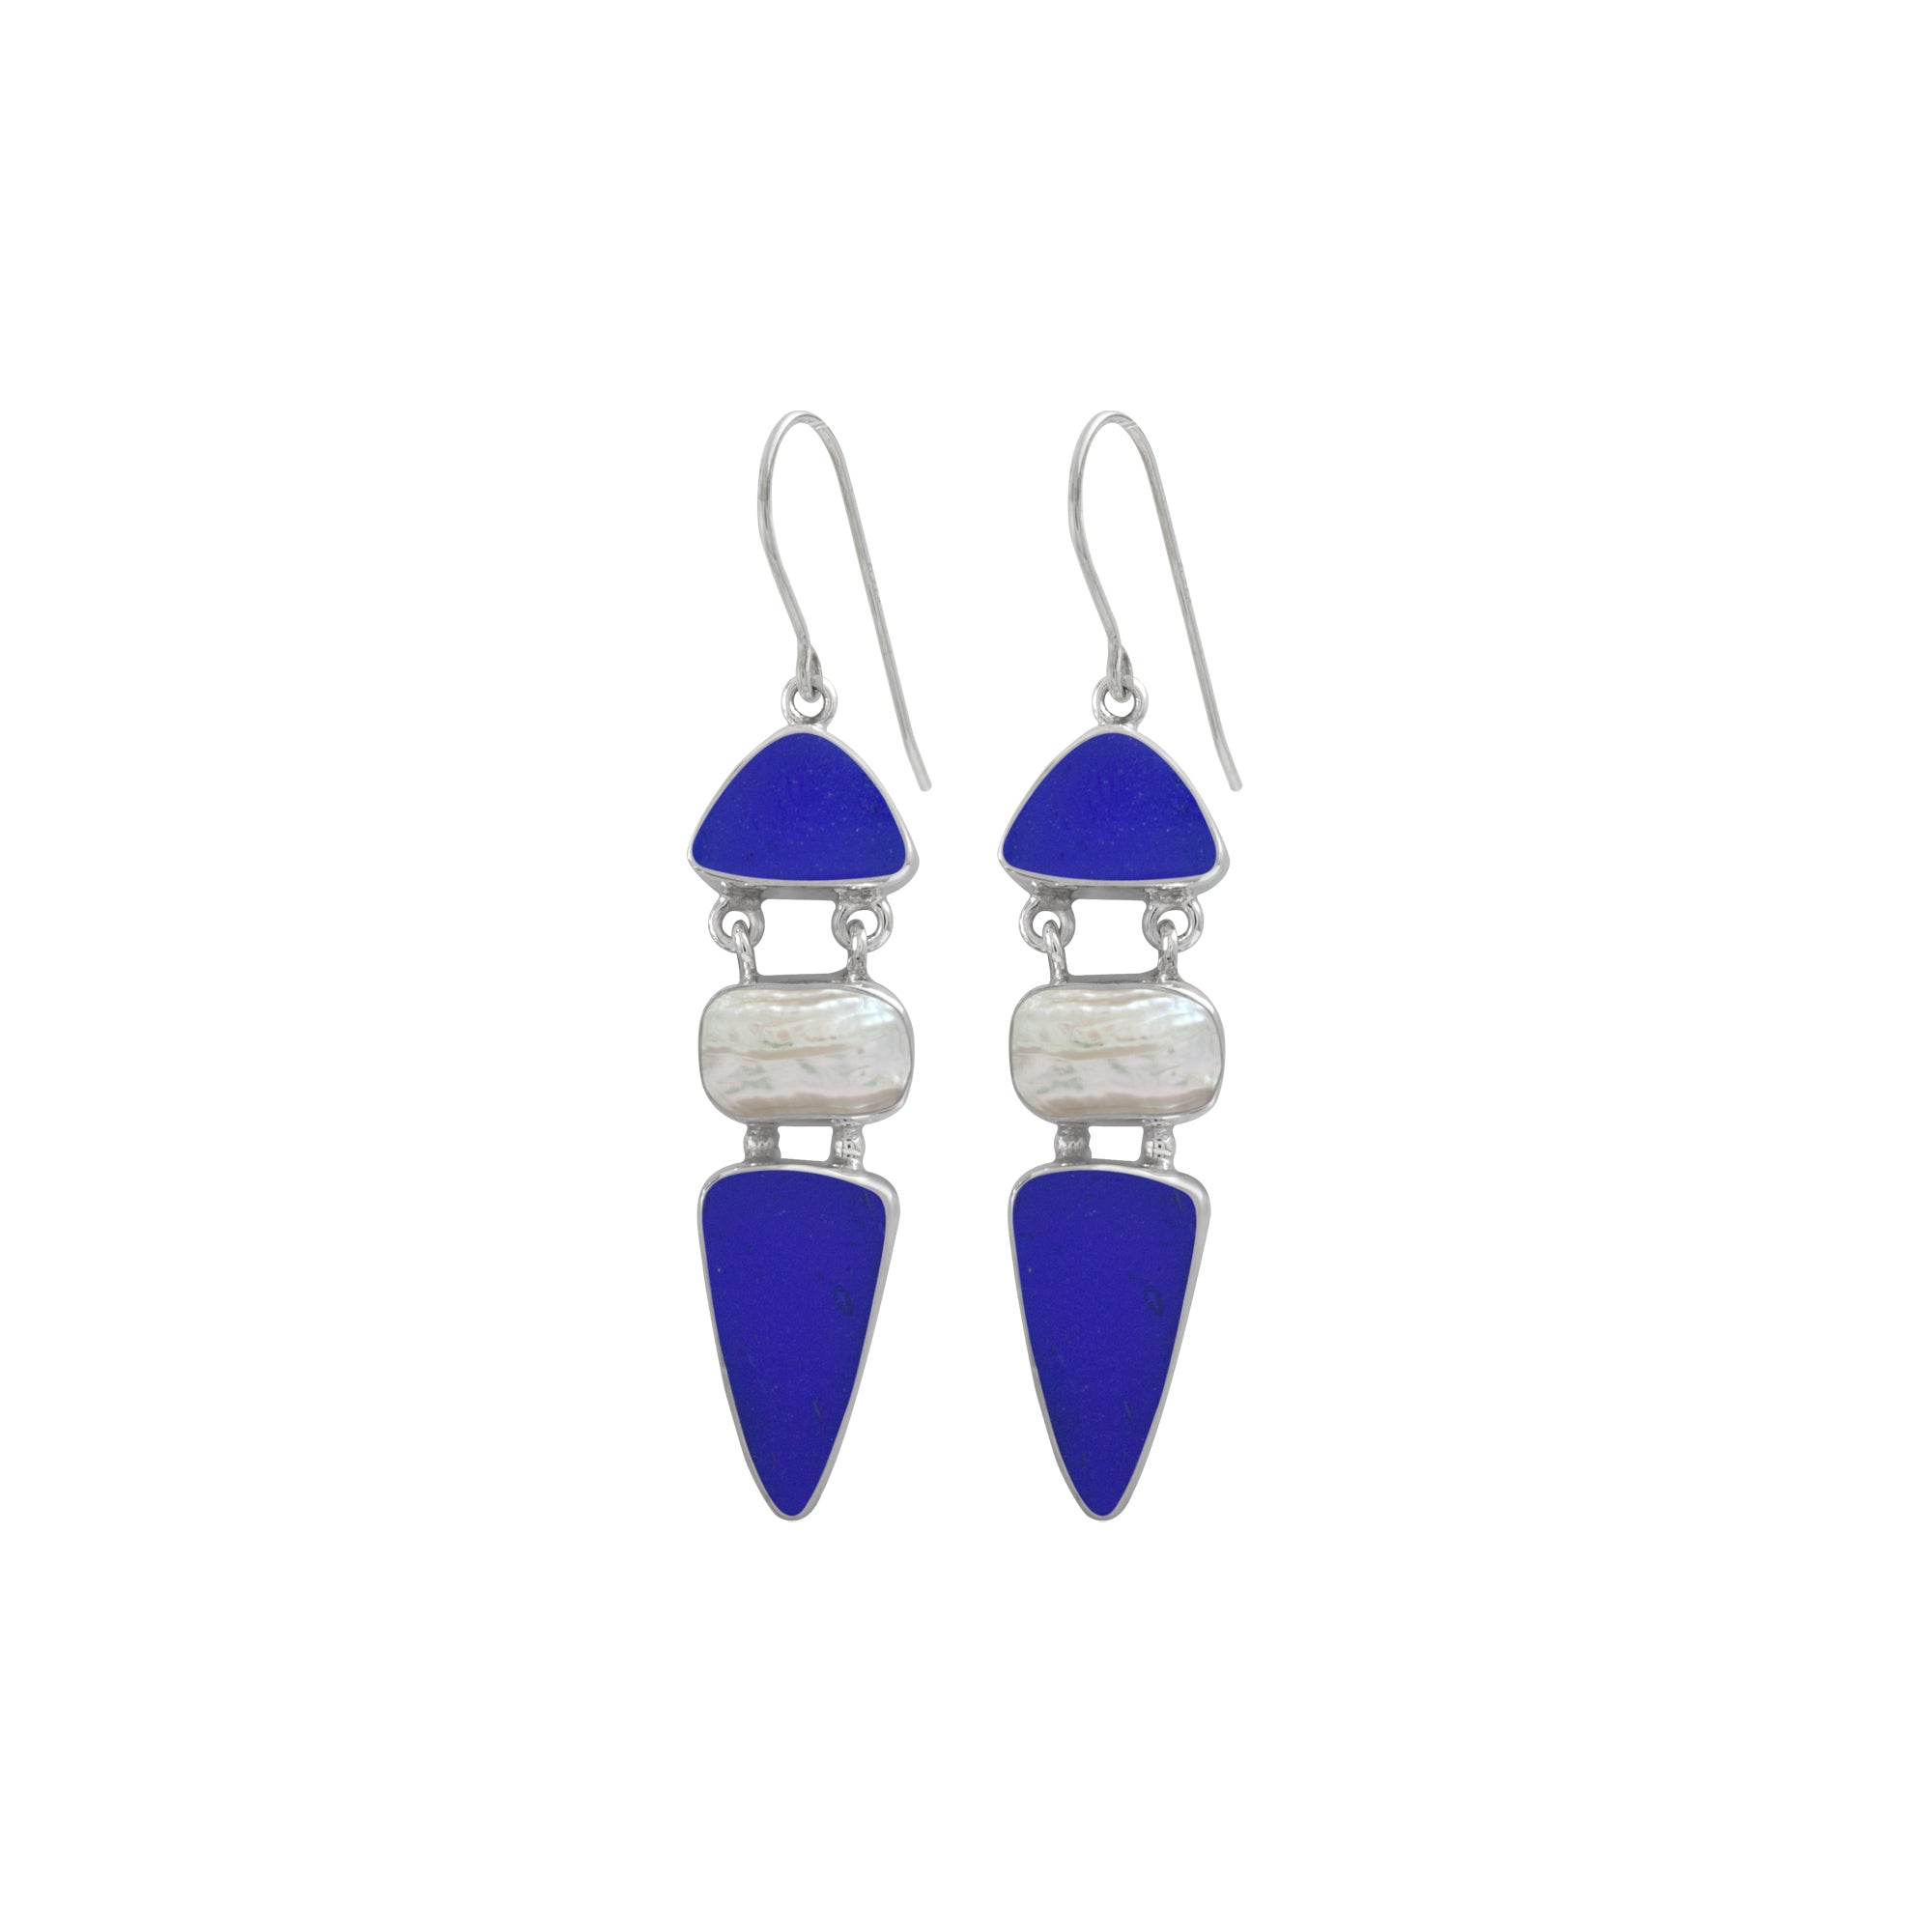 Exceptional Sea Glass and Pearl Earrings